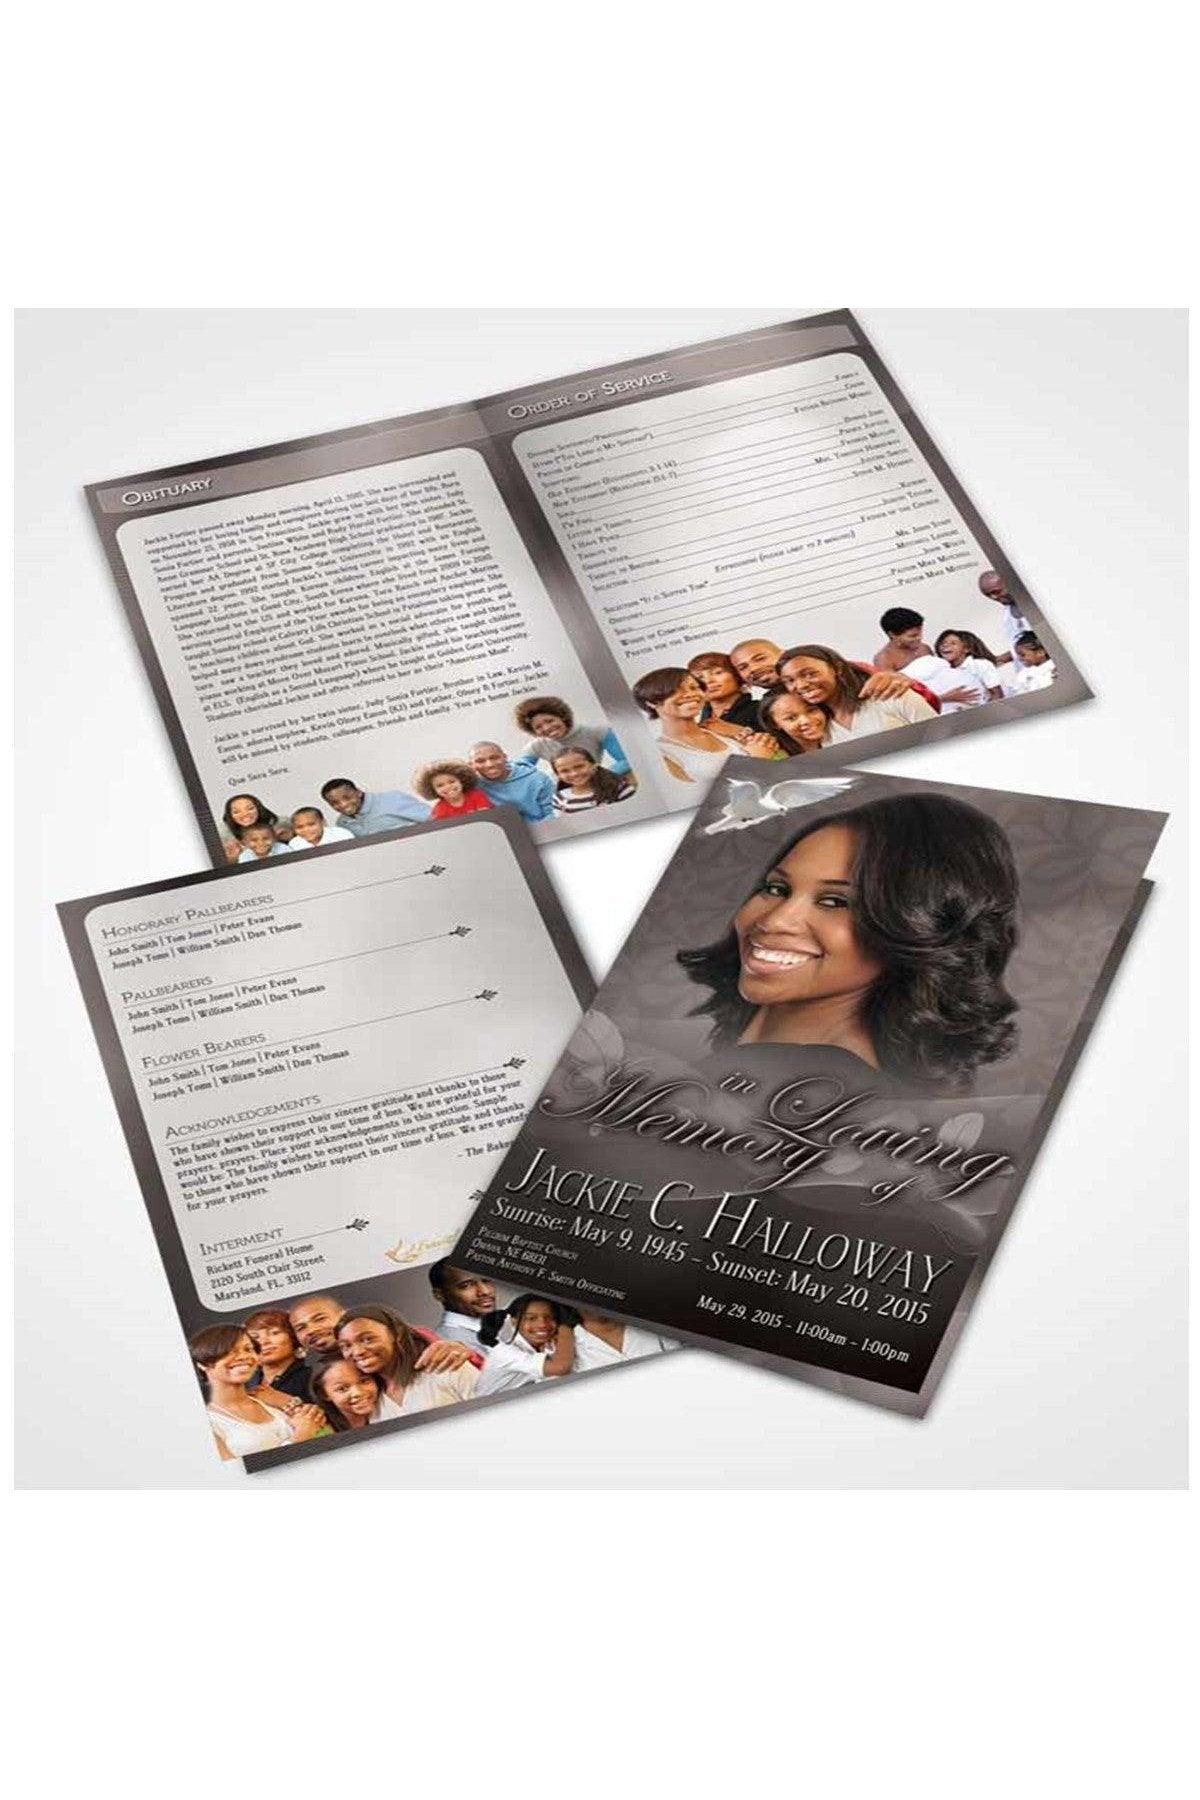 Divinity Collection Colors Obituaries - 4 and 8 Pages Bifold- 8.5x11 and 11x17 is priced at 100 - Freedom Printing